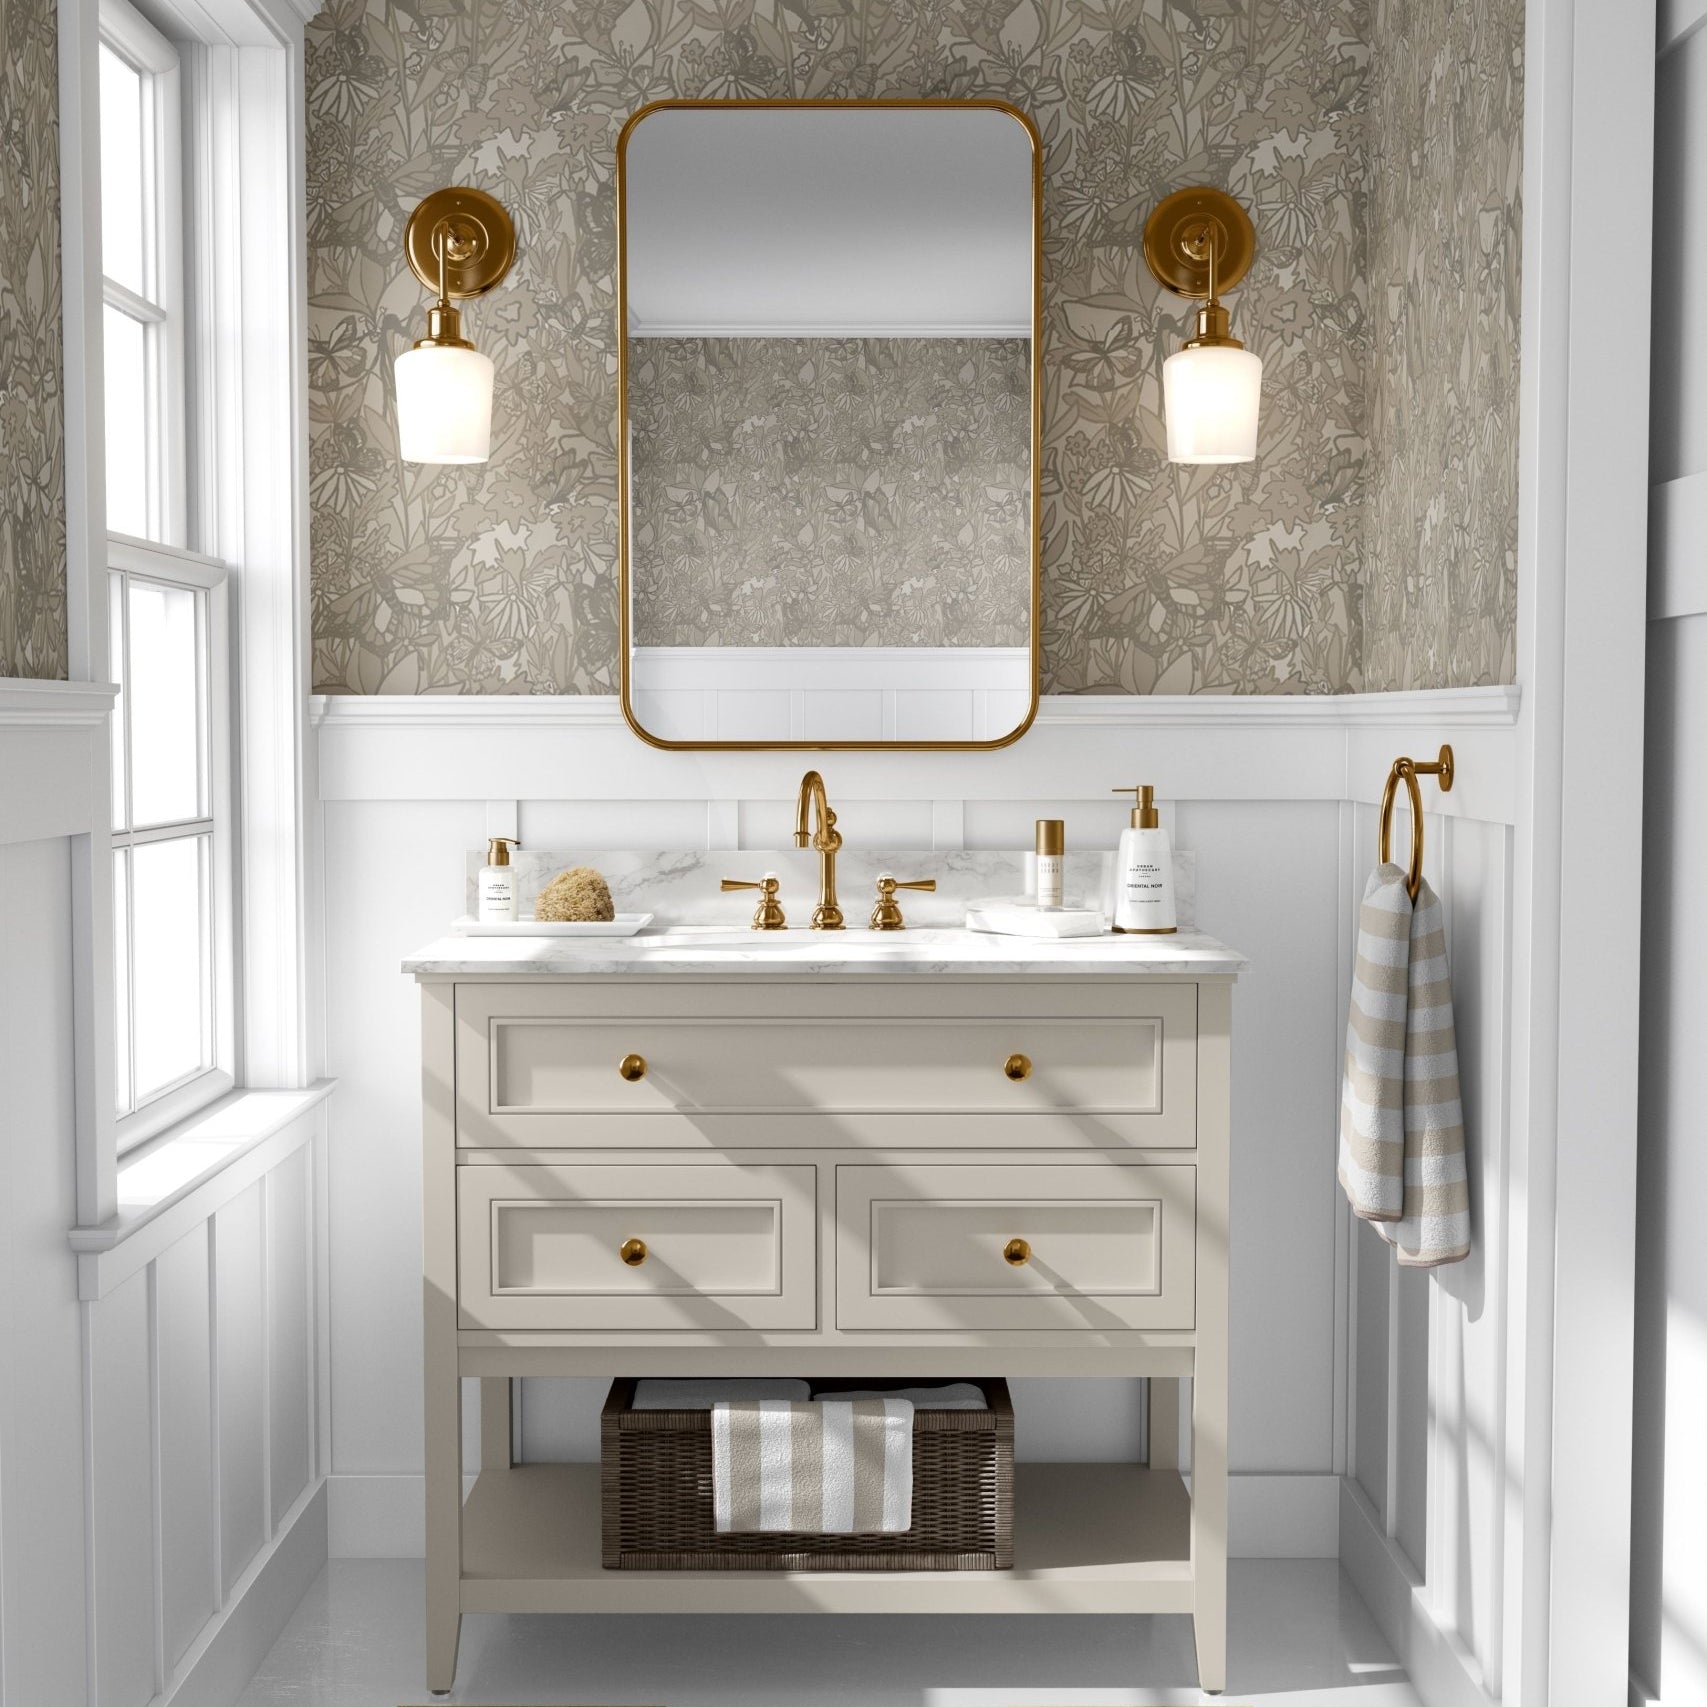 A stylish bathroom with walls covered in a neutral-toned butterfly and floral wallpaper. The decor includes a white vanity with gold handles, a white marble top, and brass fixtures.